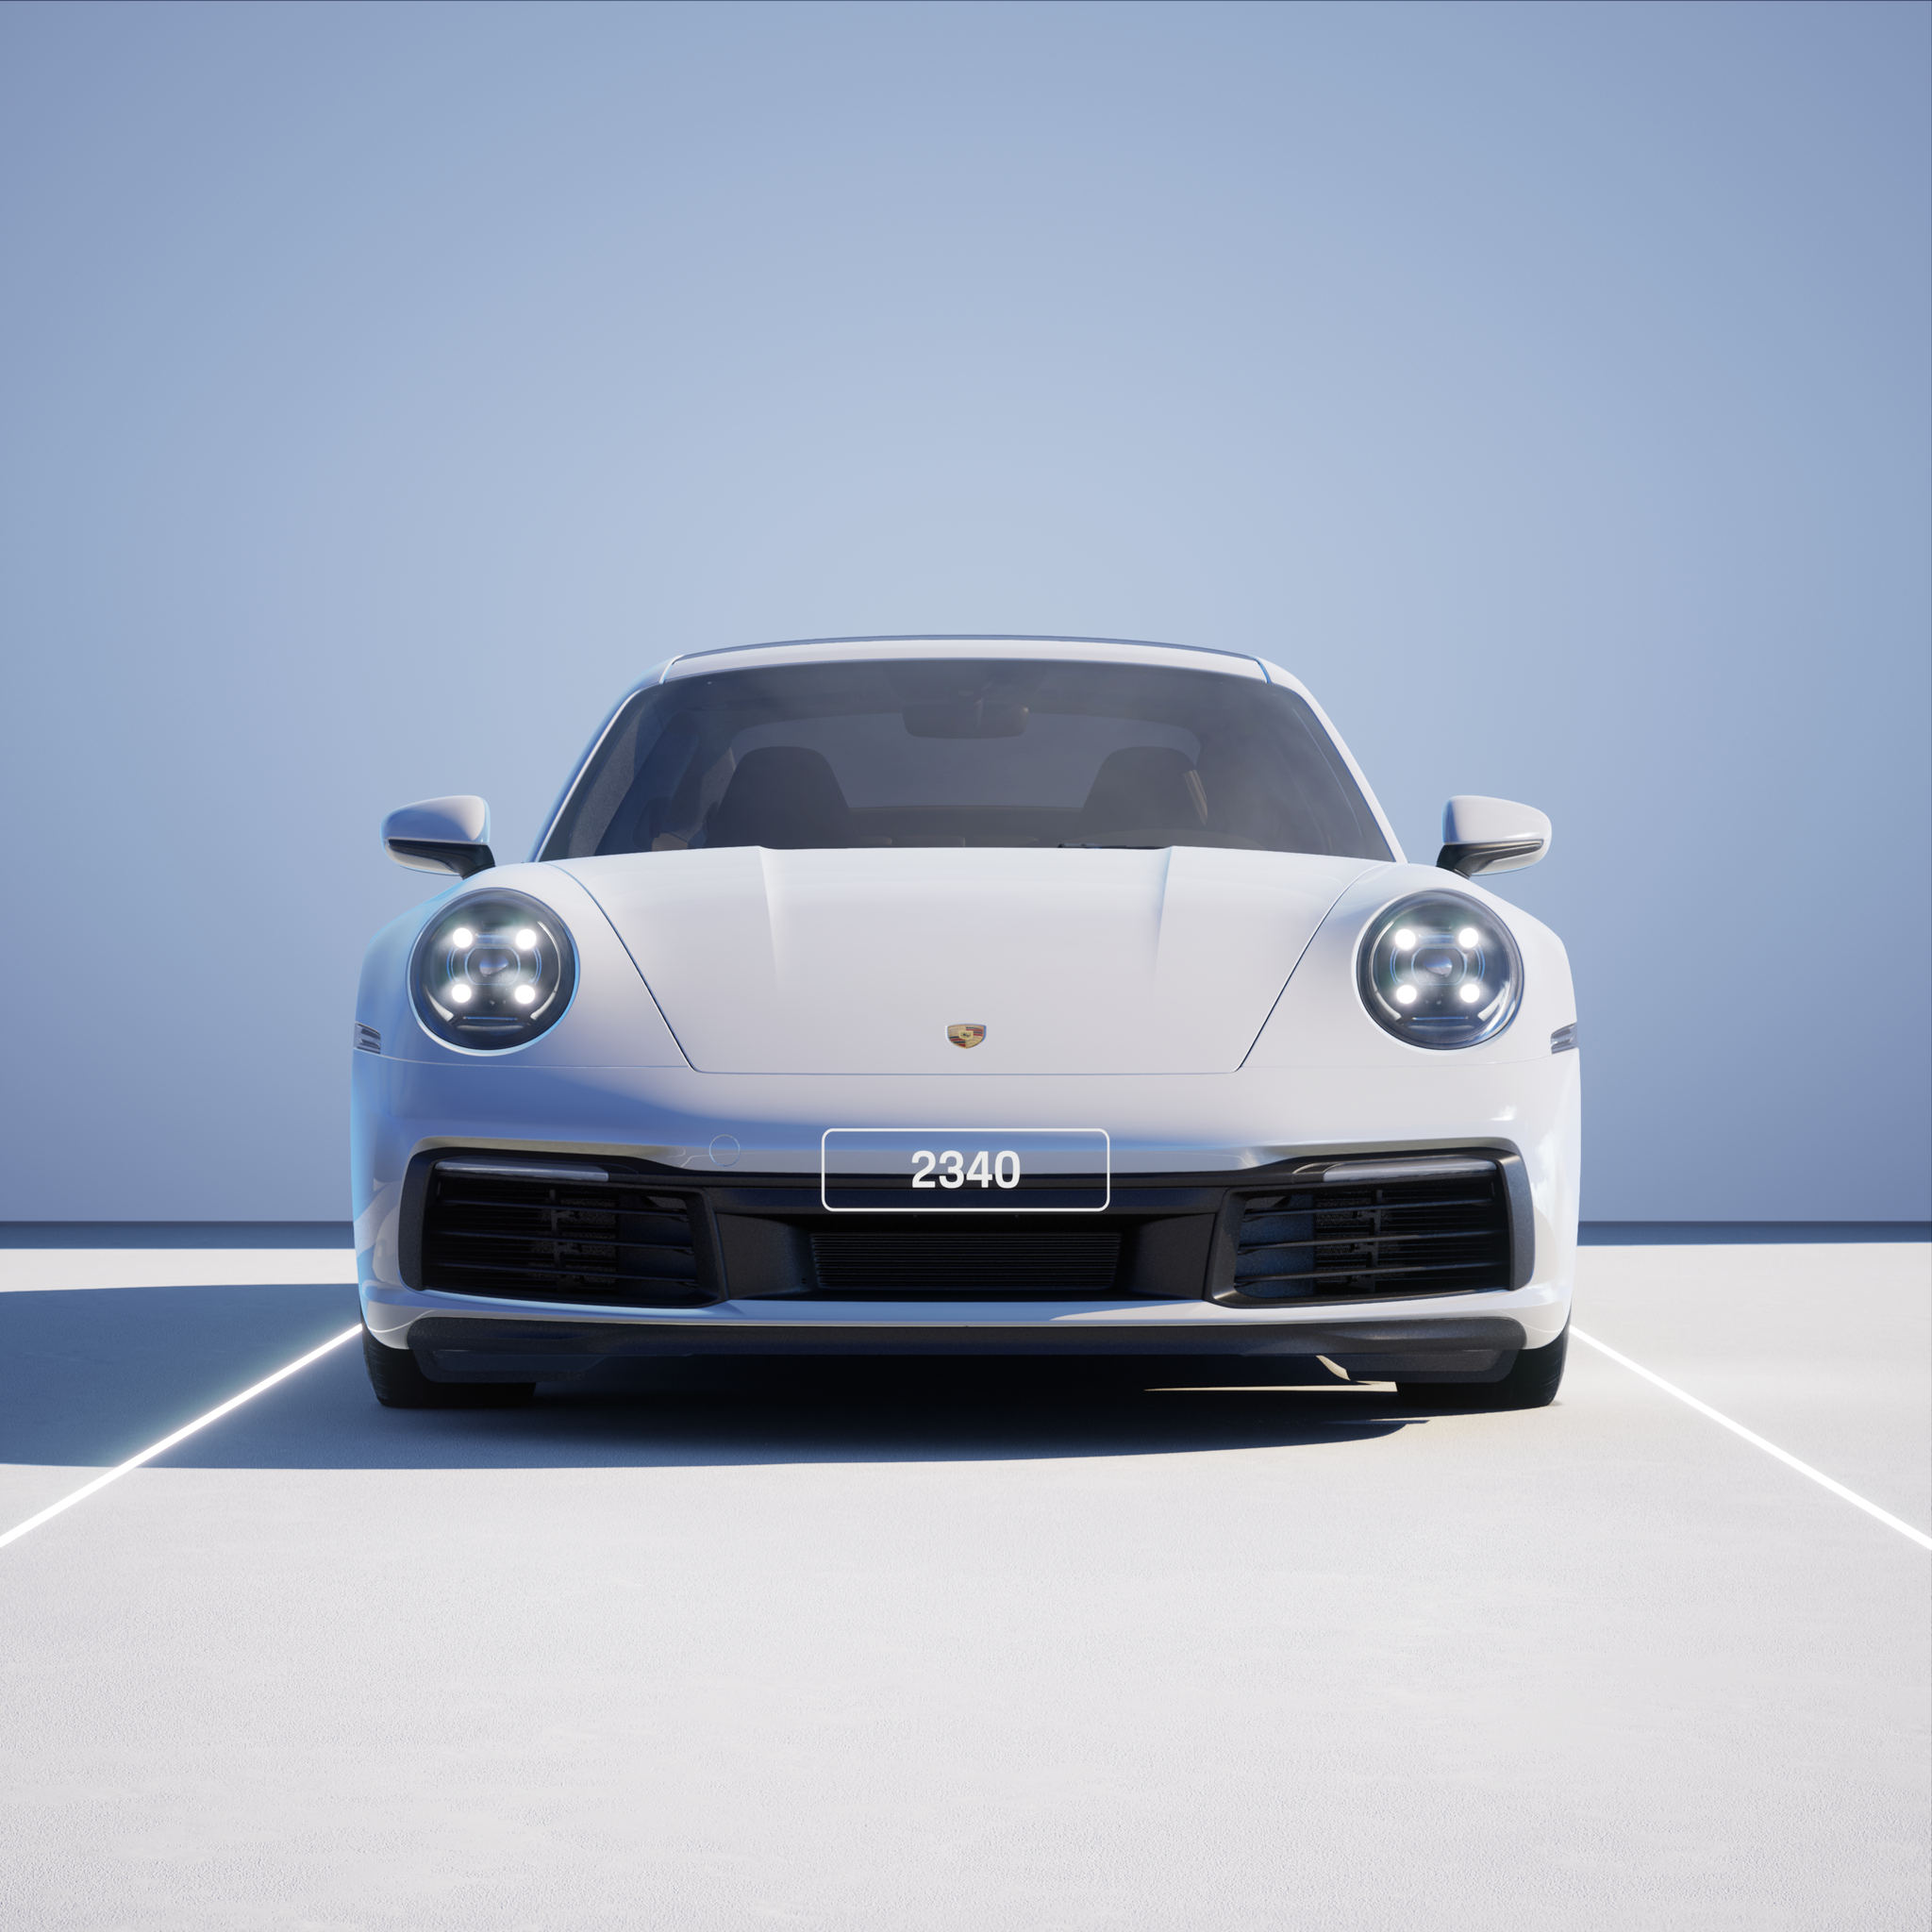 The PORSCHΞ 911 2340 image in phase